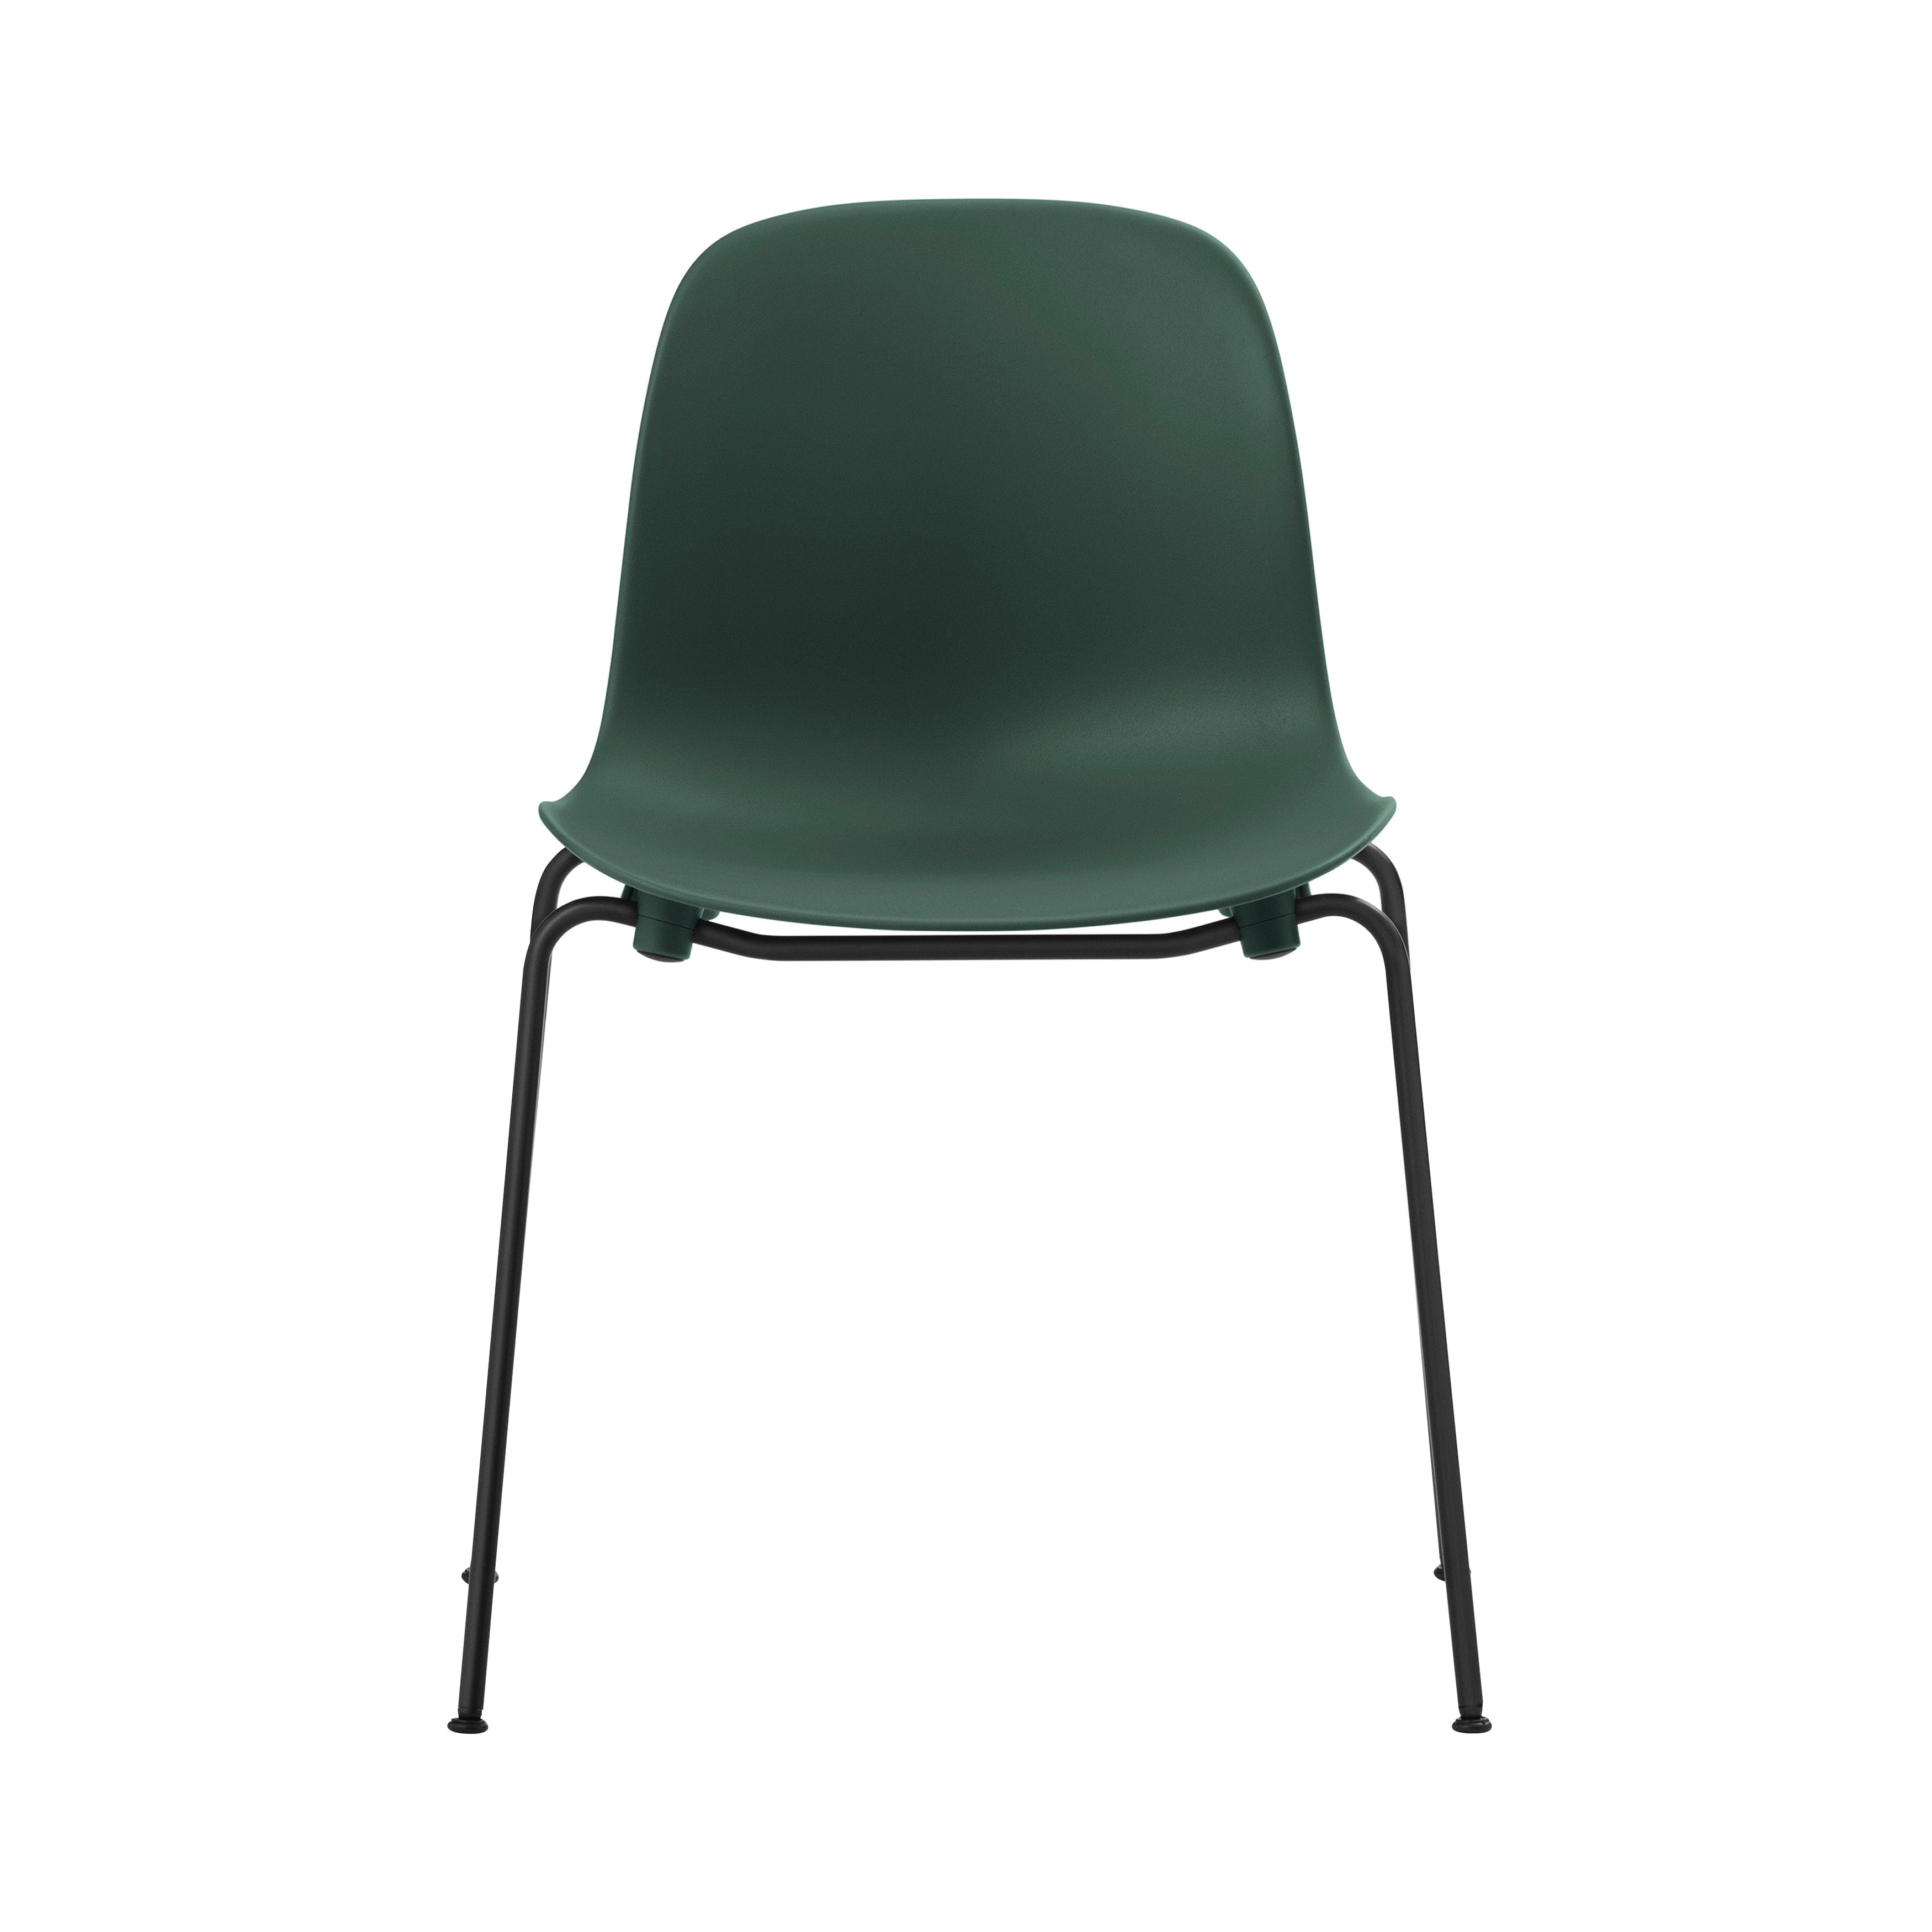 Form Stacking Chair: Steel + Green